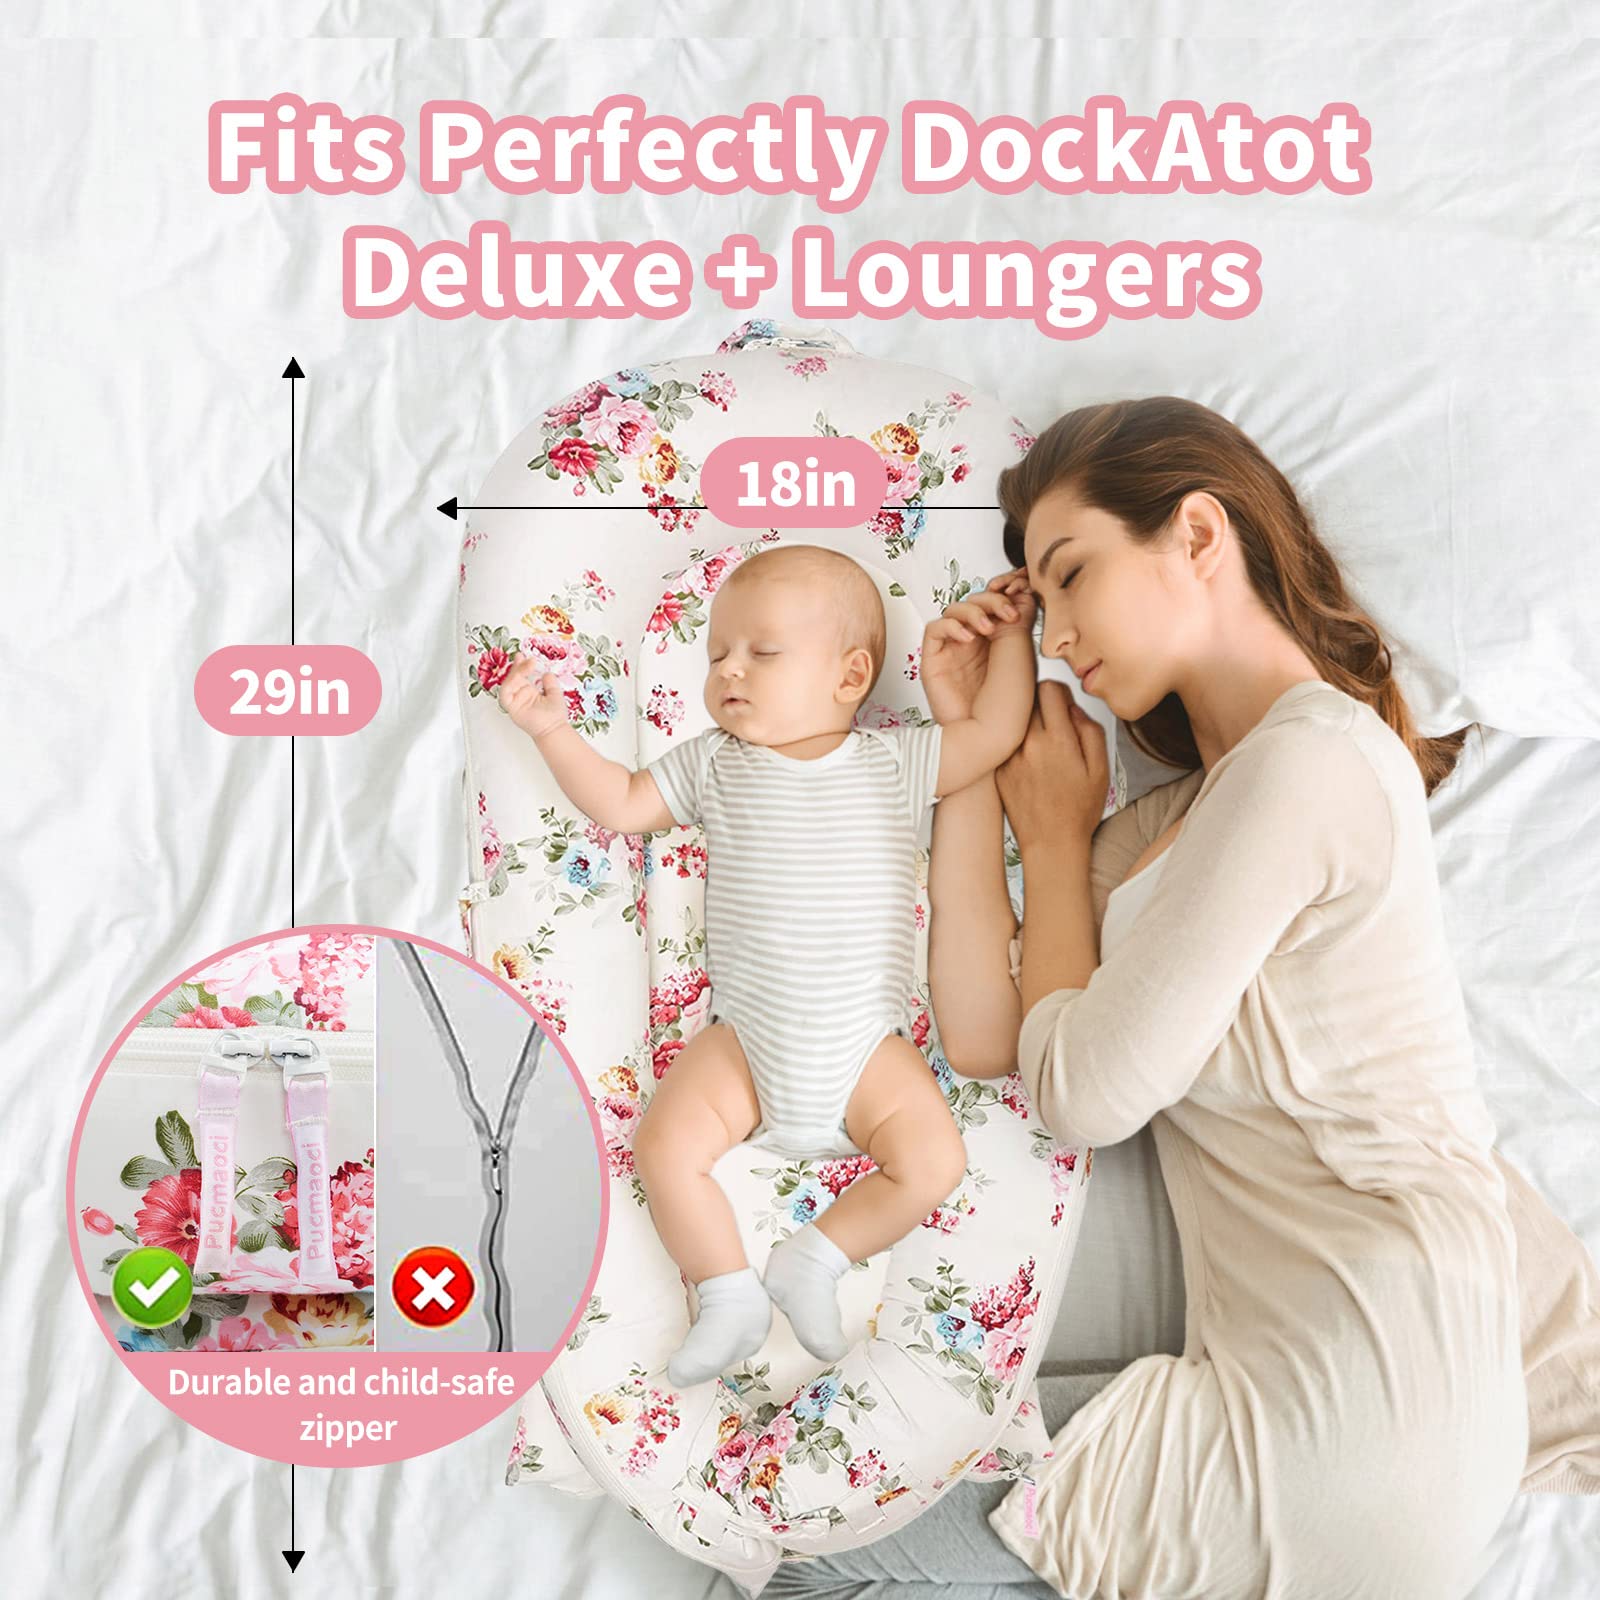 Baby Lounger Cover for Dockatot Deluxe + | 100% Cotton Hypoallergenic Newborn Premium Quality Spare Cover(Cover Only) (Rose)